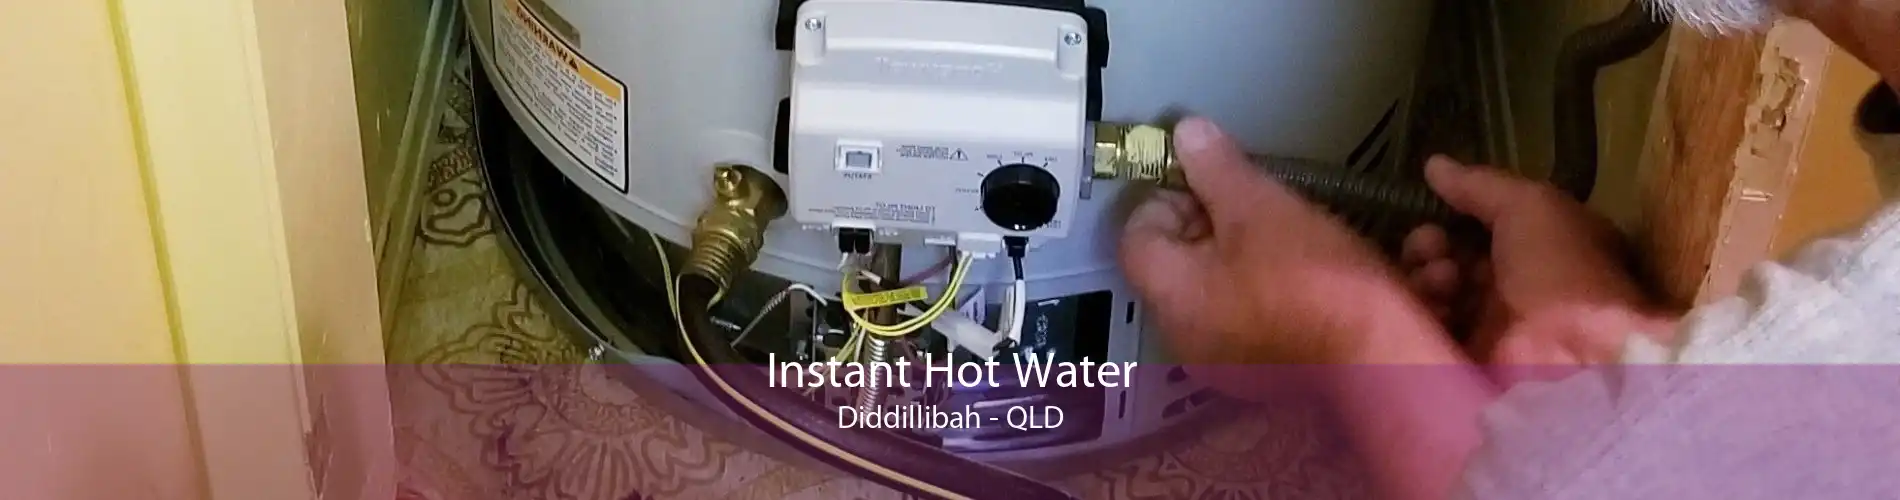 Instant Hot Water Diddillibah - QLD